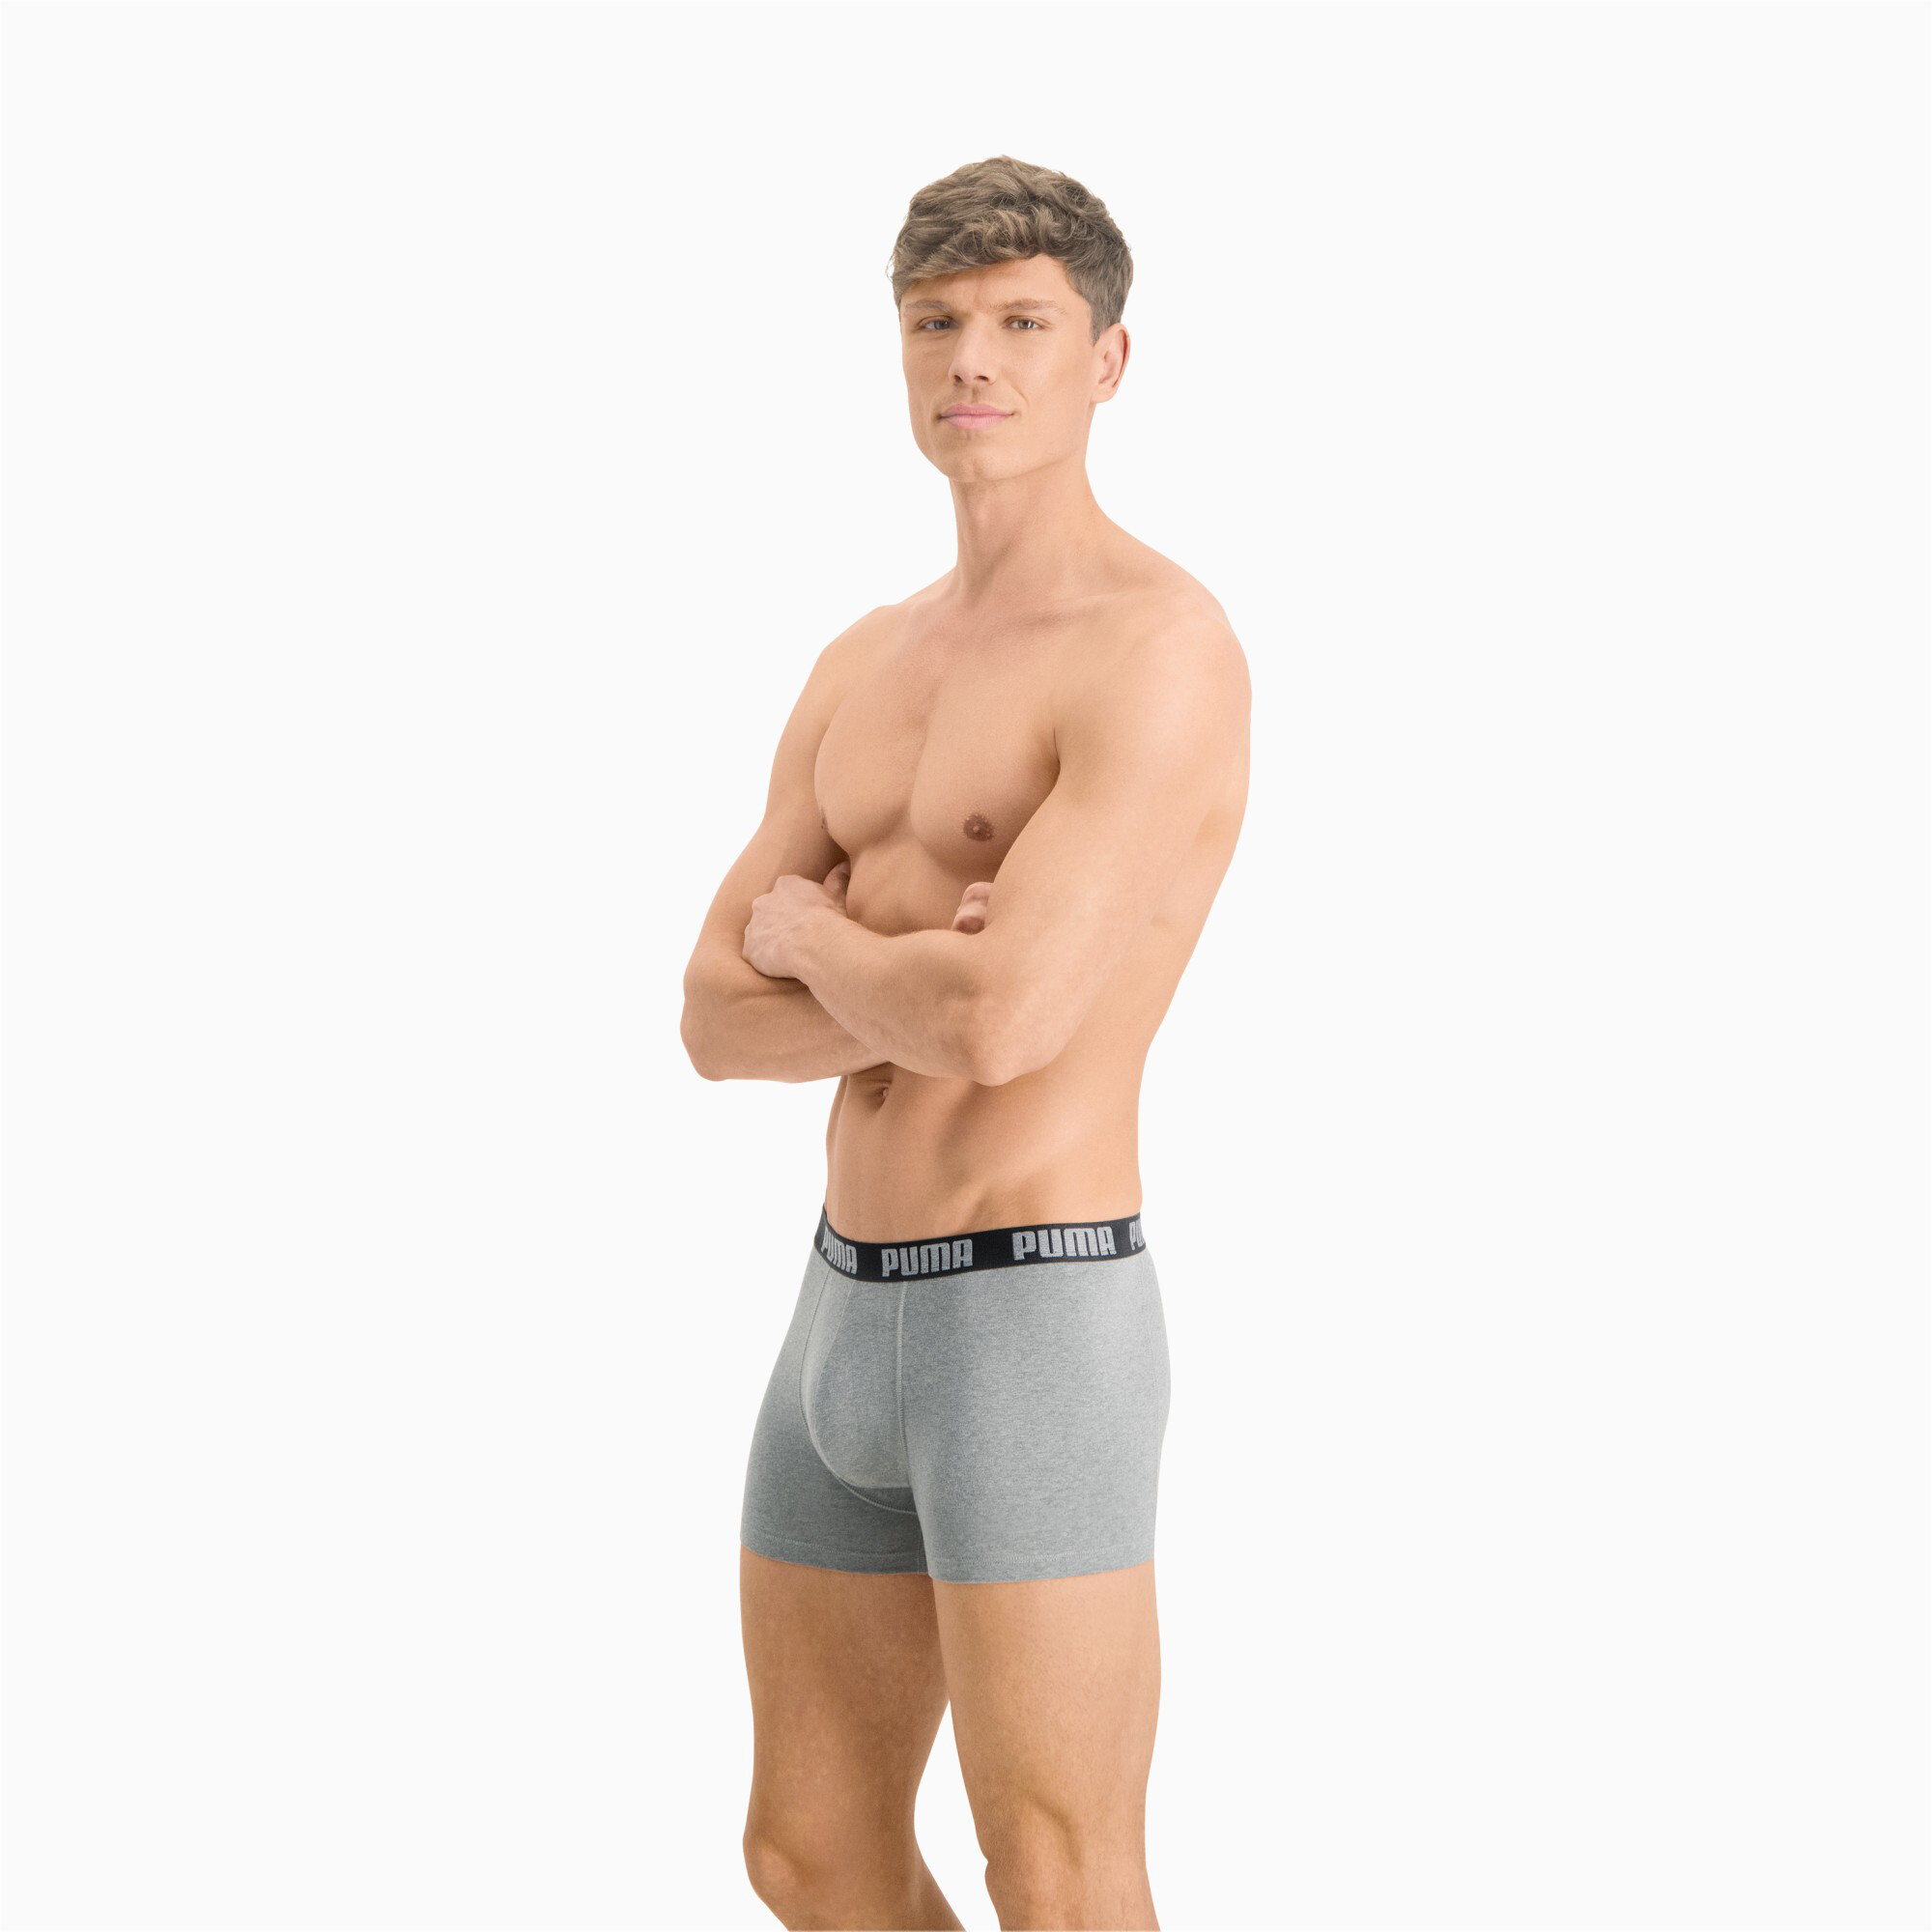 Men's Puma's Everyday Boxers 3 Pack, Size 2, Clothing